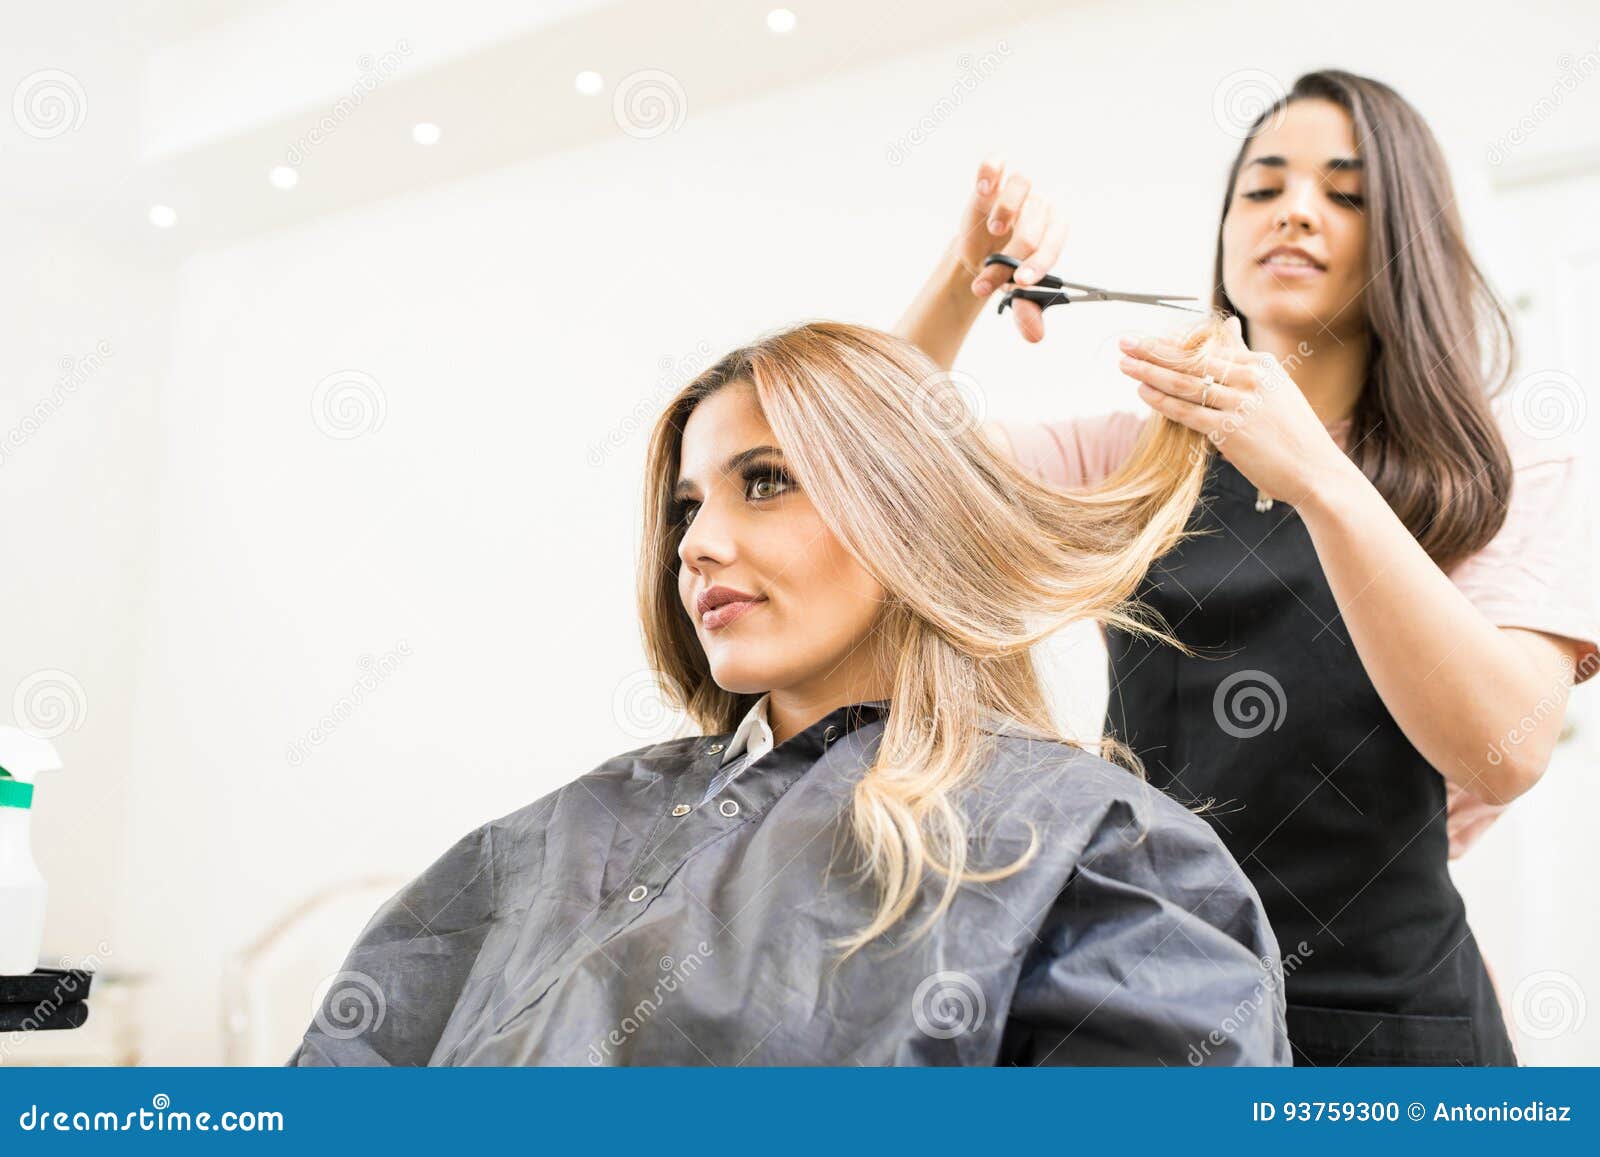 hairdresser cutting some hair tips